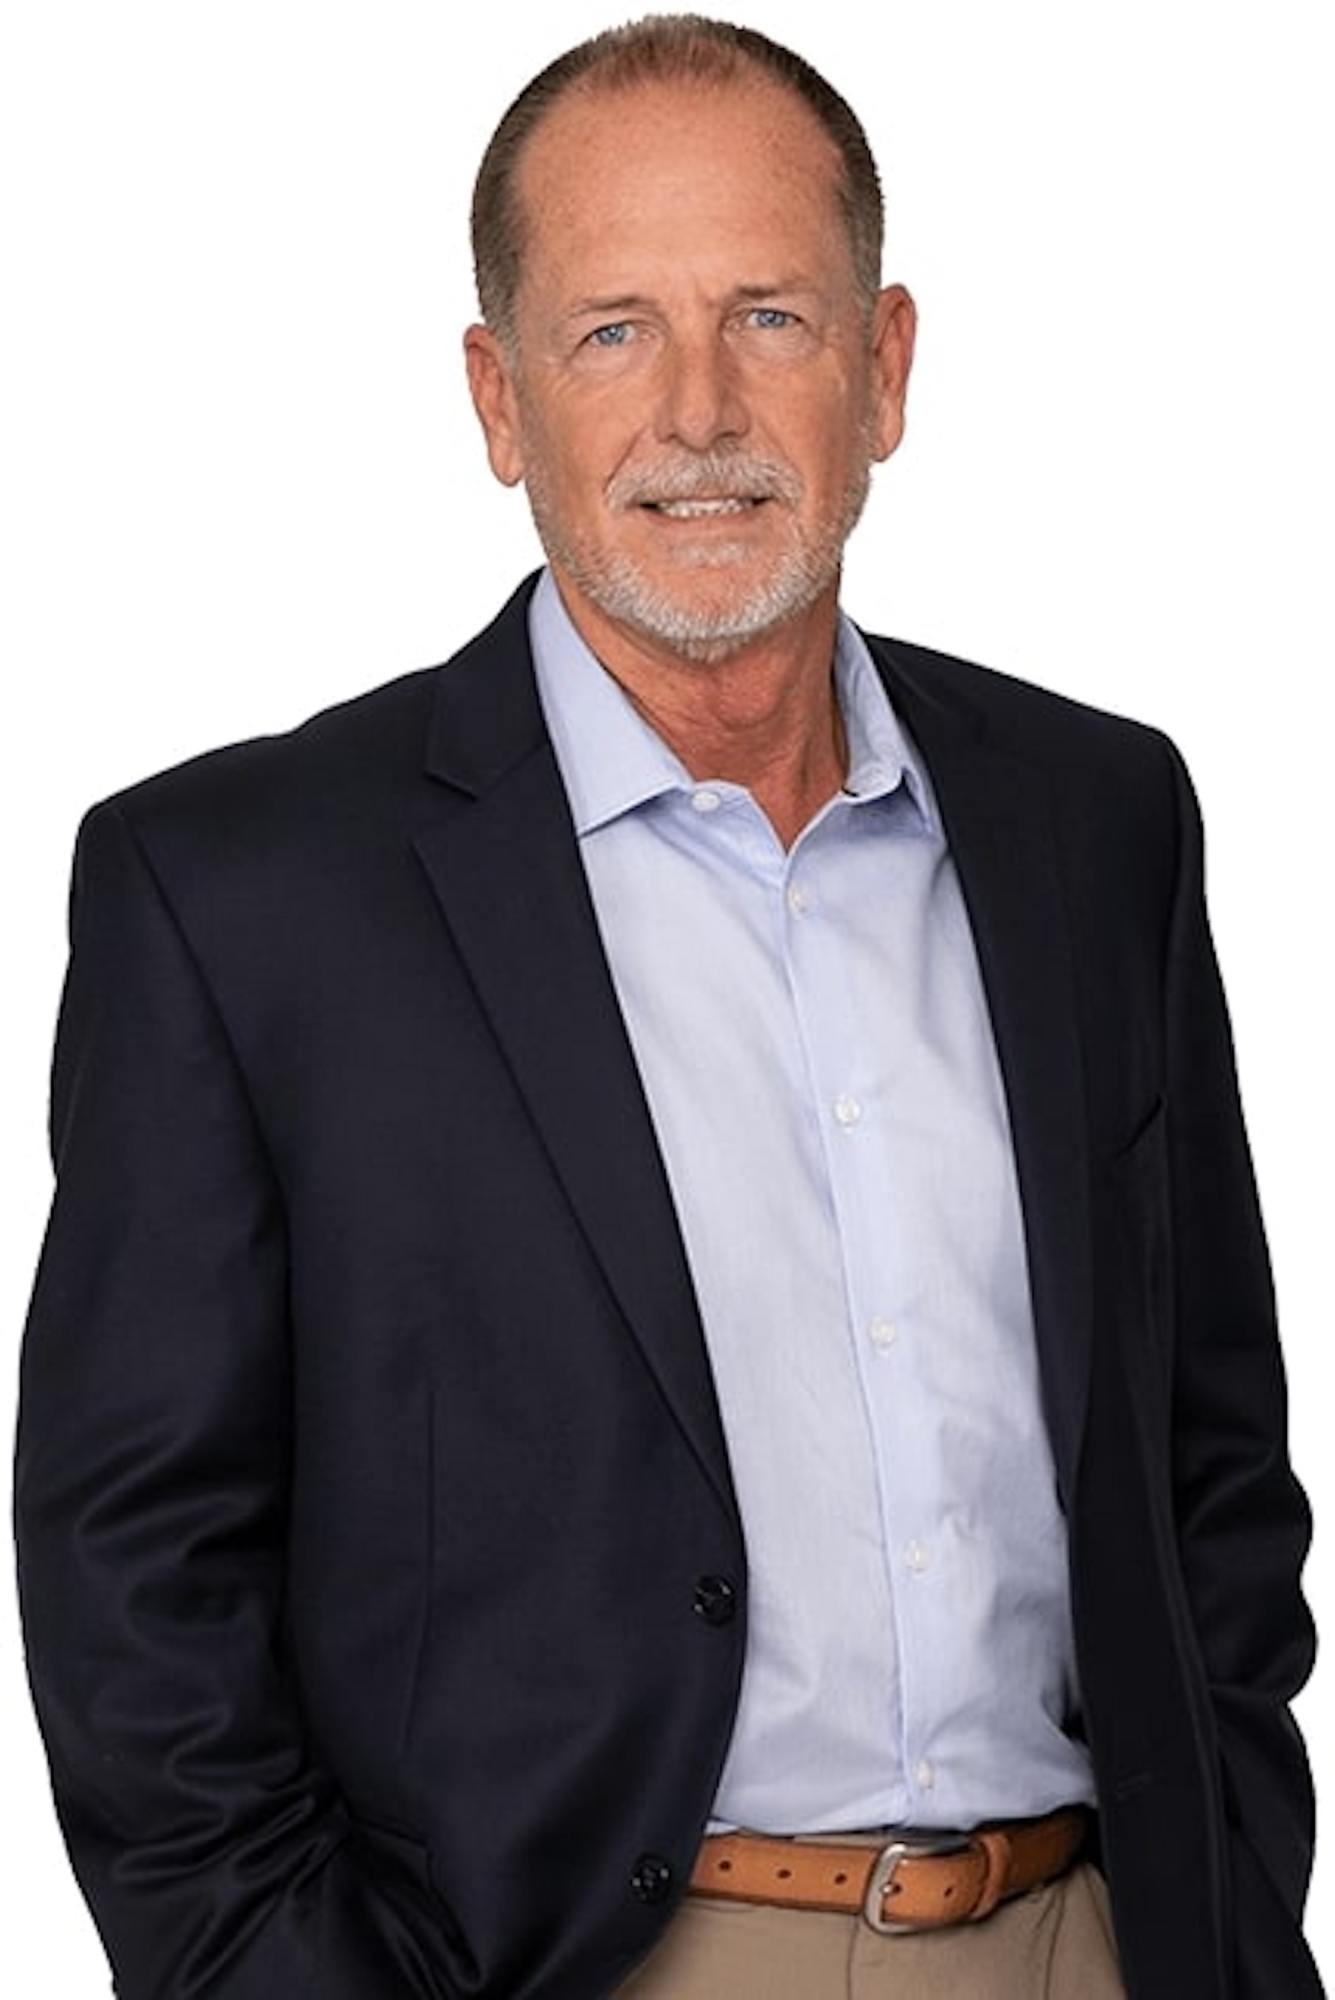 COURTESY PHOTO — Bob Vail is president of Kolter Urban, a division of the West Palm Beach company that specializes in vertical construction projects.